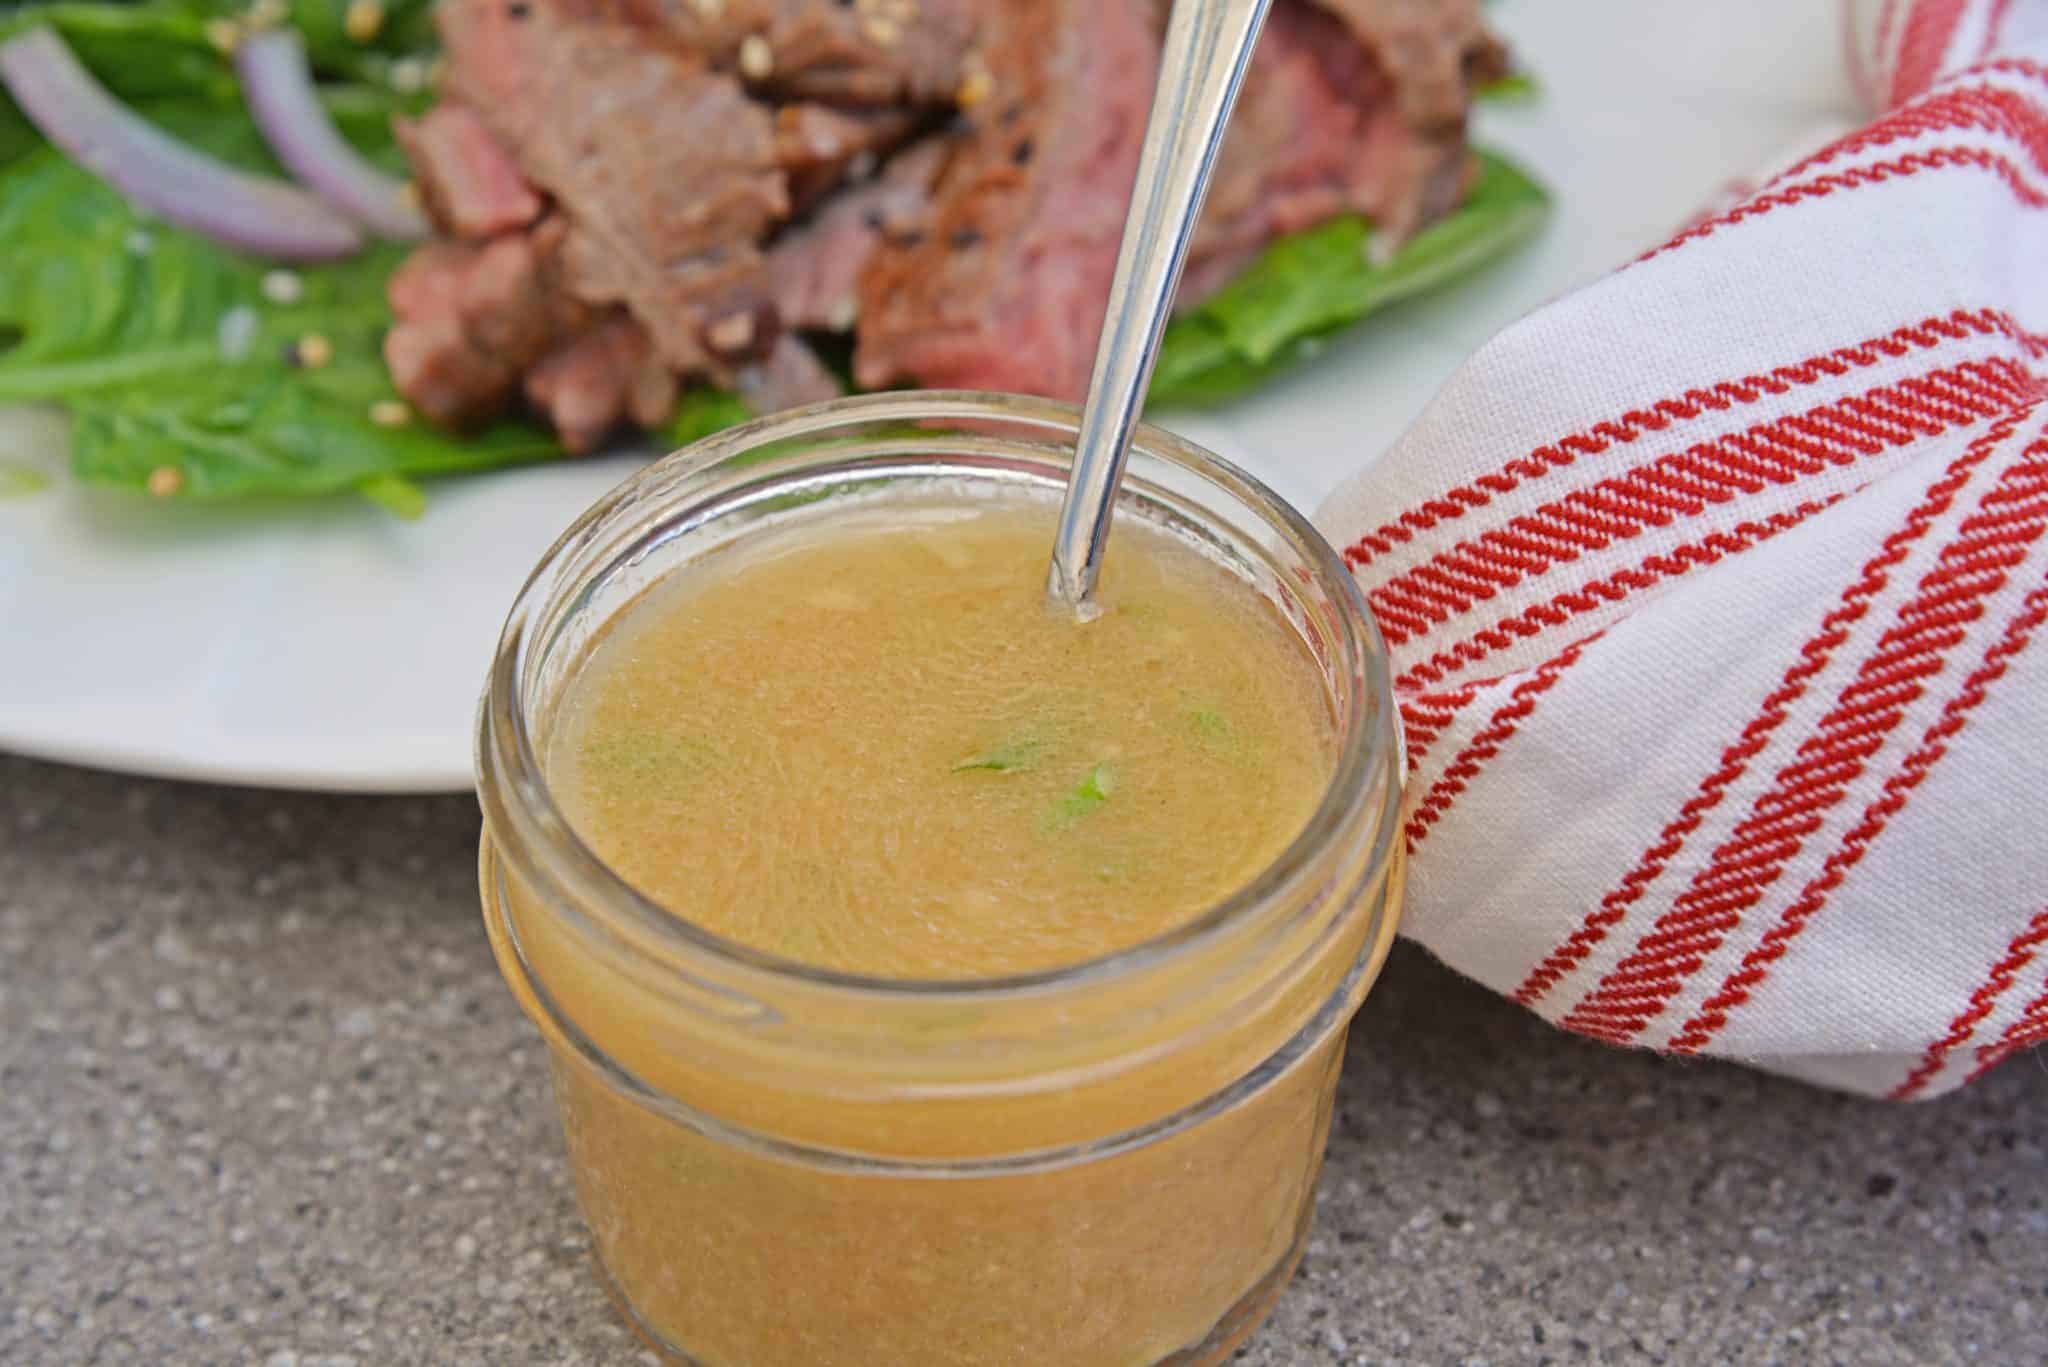 Sweet Miso Ginger Dressing is an easy Japanese ginger dressing. Now you can make your favorite miso ginger dressing at home with a handful of ingredients! #misogingerdressing #gingersaladdressing www.savoryexperiments.com